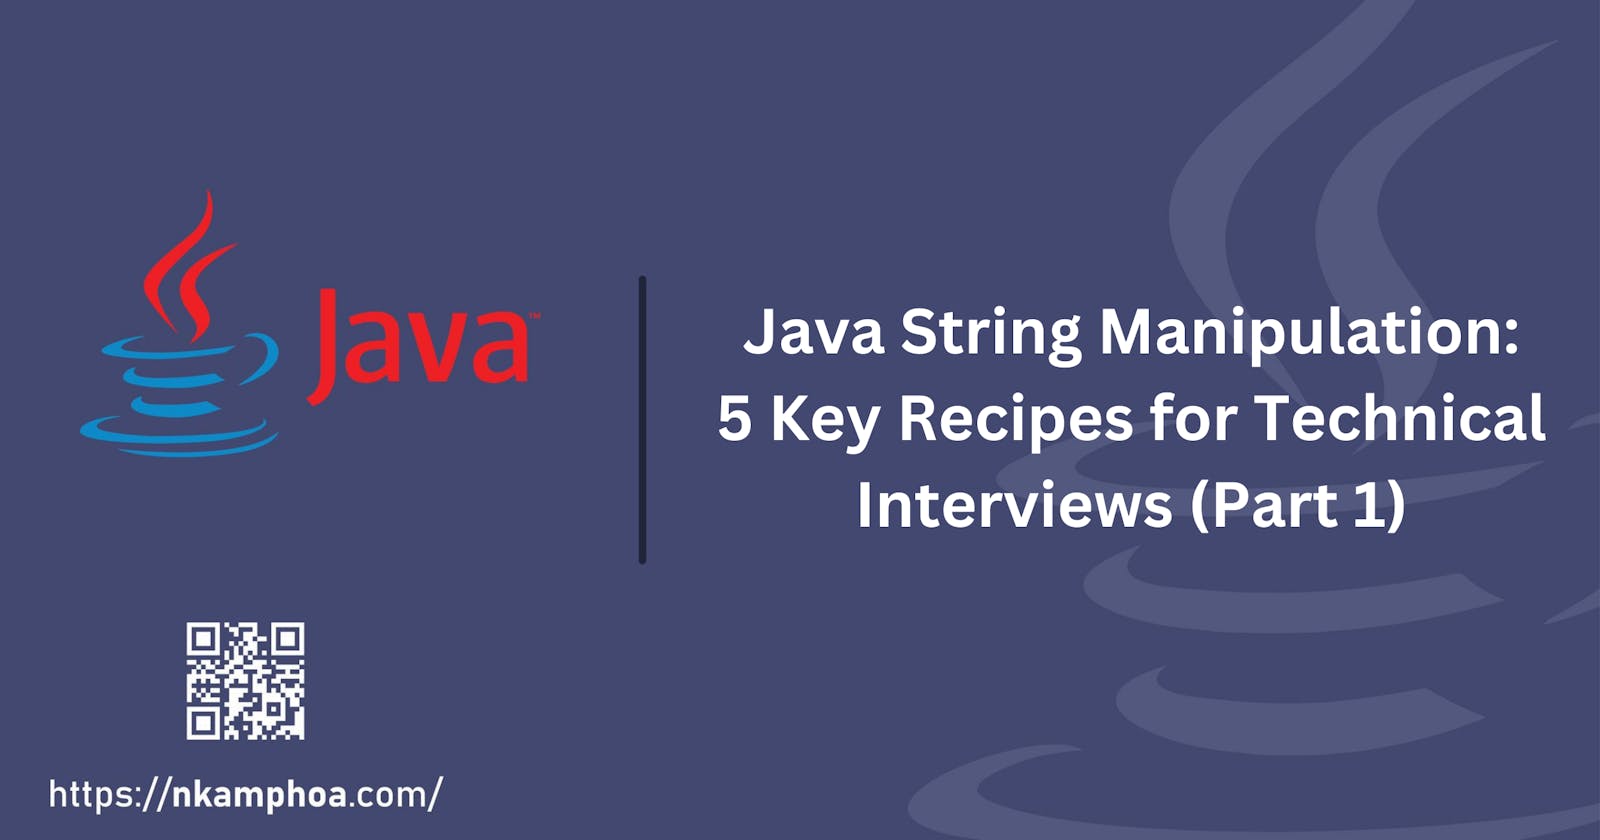 Java String Manipulation: 5 Key Recipes for Technical Interviews (Part 1)